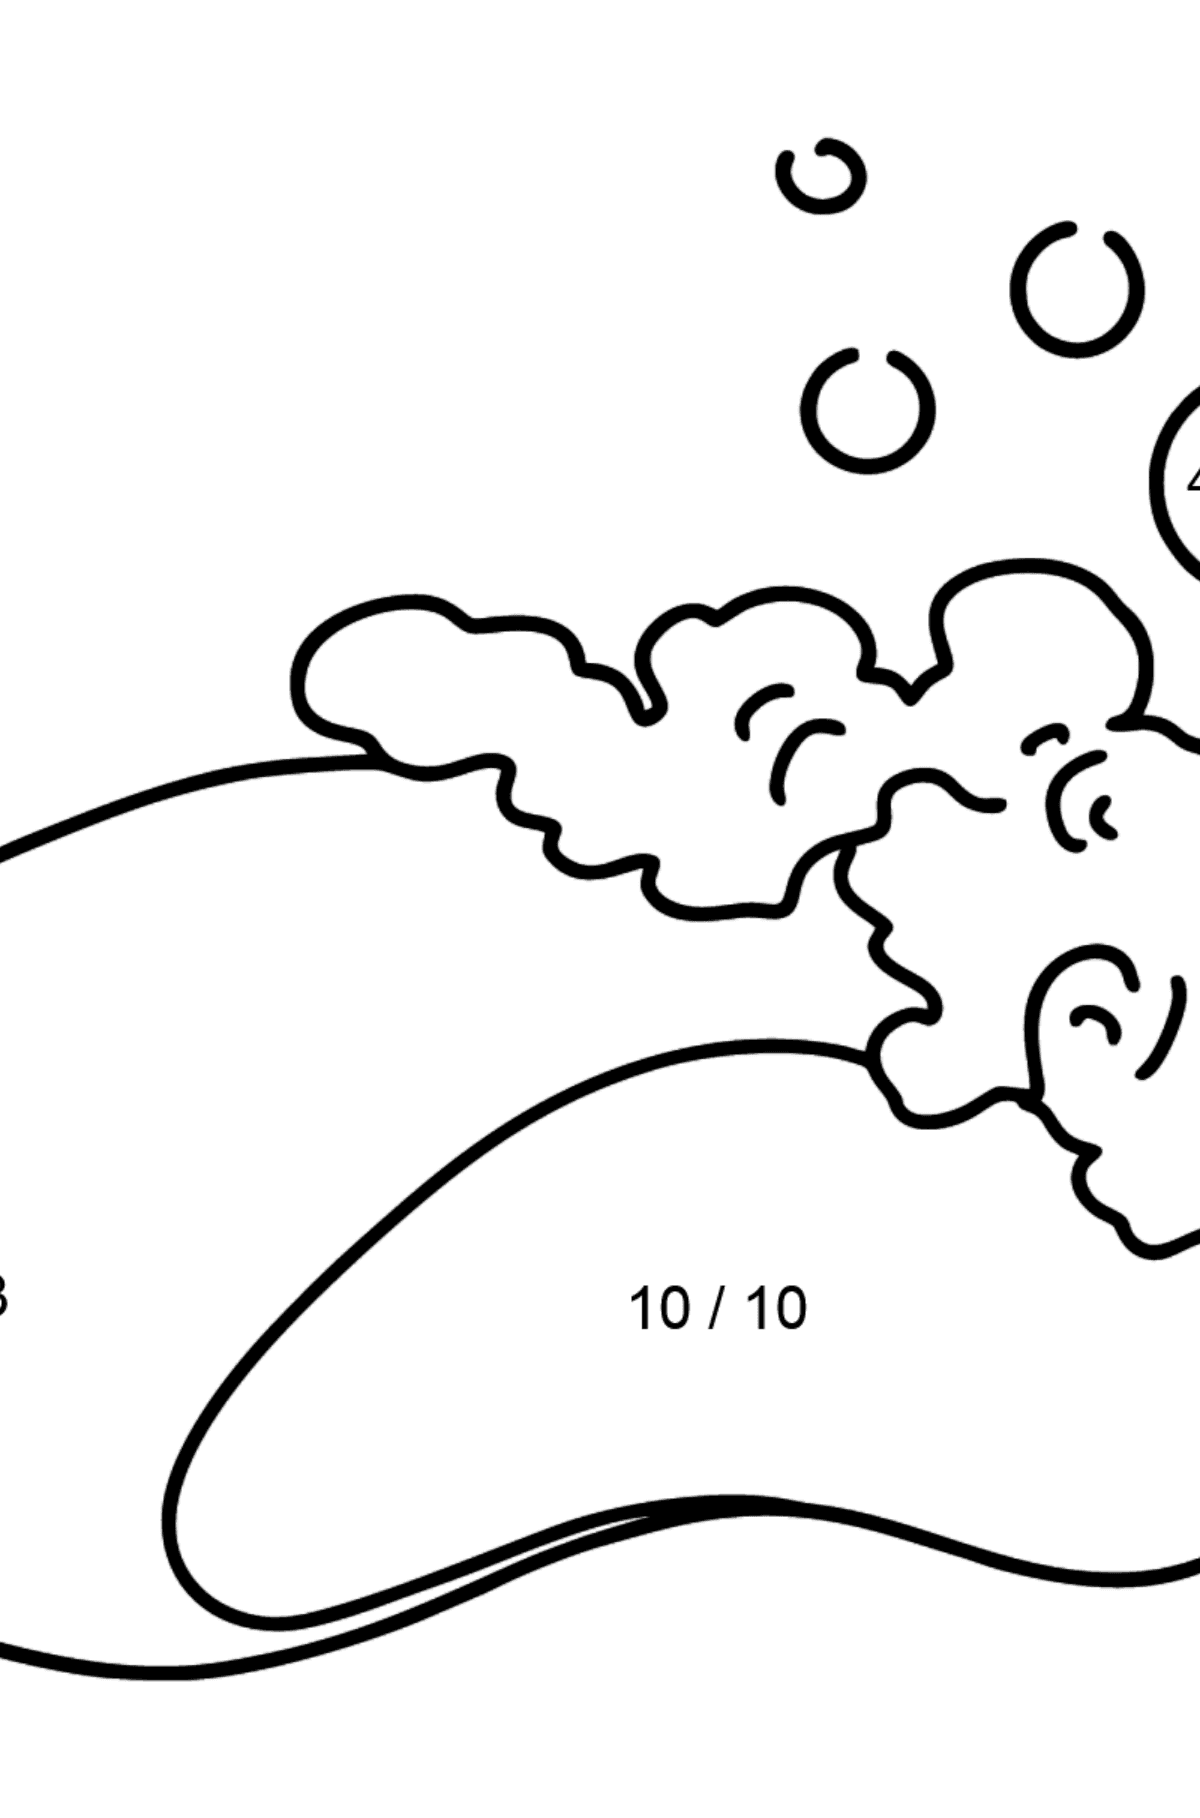 Soap coloring page - Math Coloring - Division for Kids